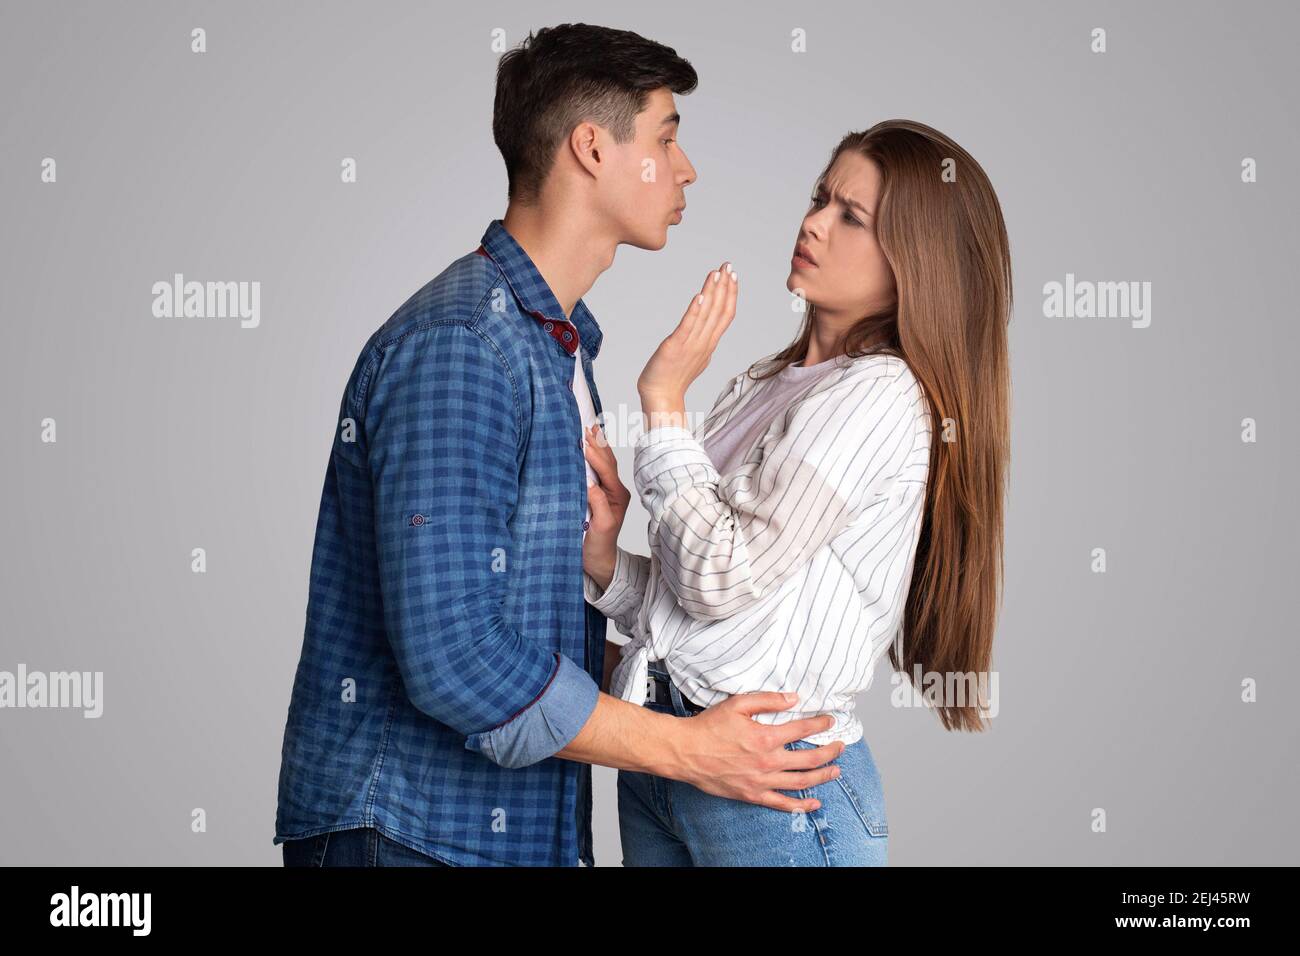 Young male tries to kiss upset lady, woman does not like molestation and does not want harassment Stock Photo